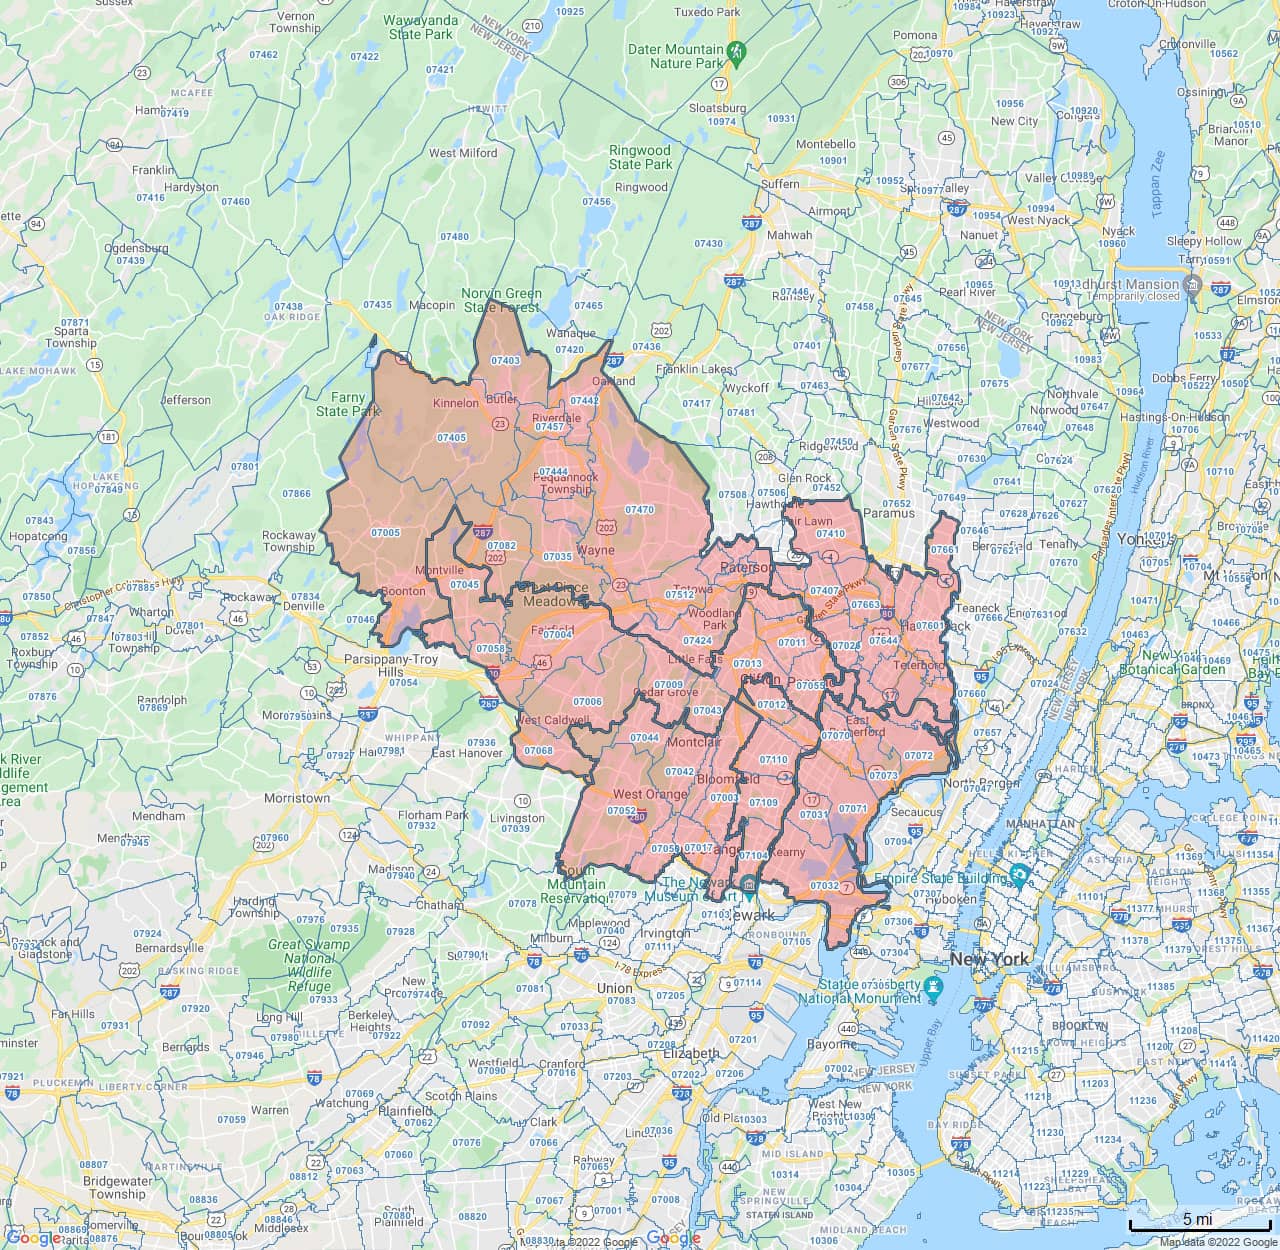 All Dry Services Area Coverage Map for North Jersey